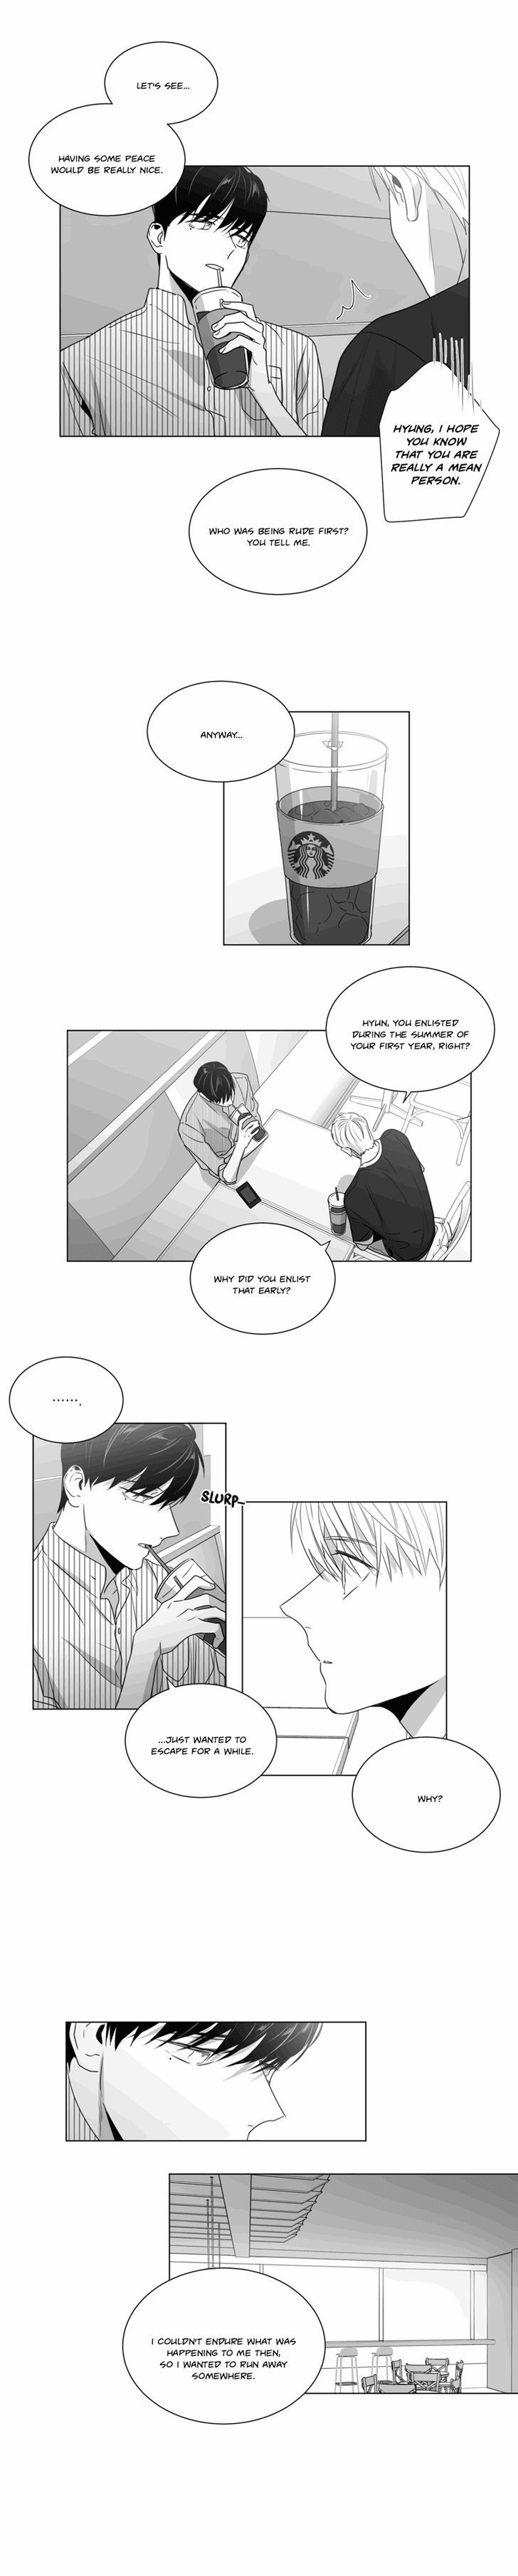 Lover Boy (Lezhin) Chapter 036 page 10